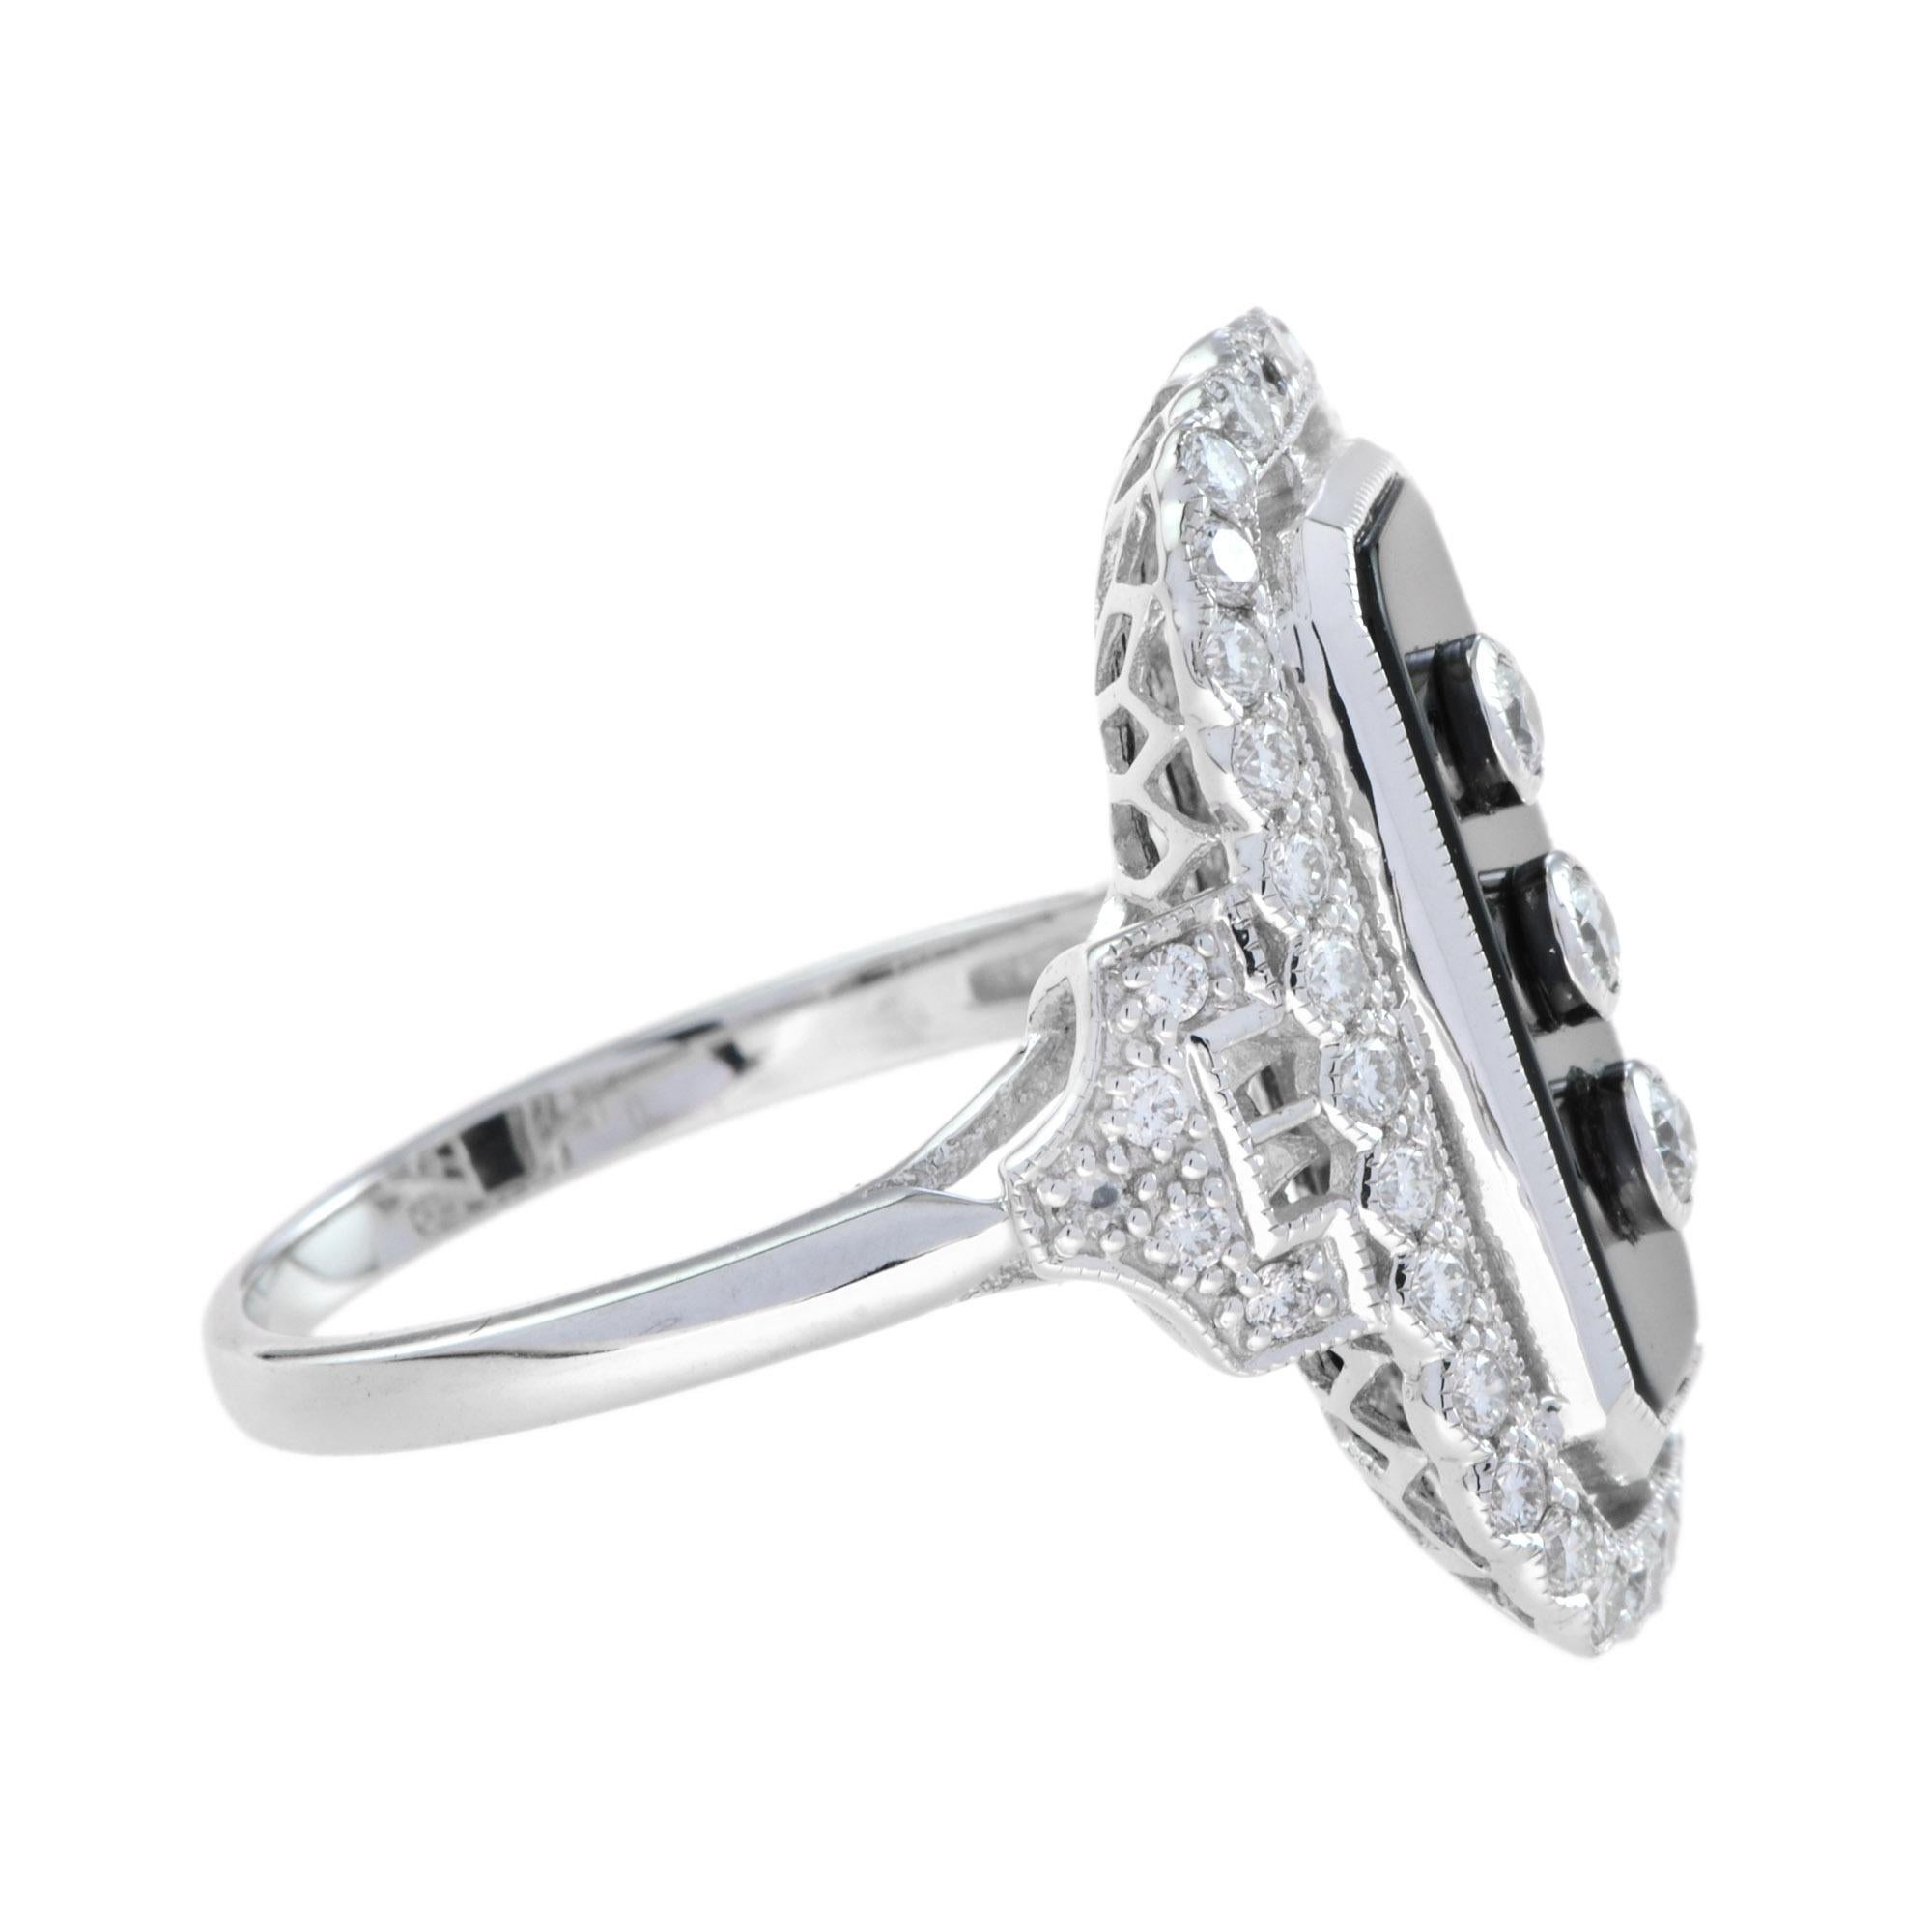 For Sale:  Art Deco Style Diamond and Onyx Ring in 18K White Gold 5